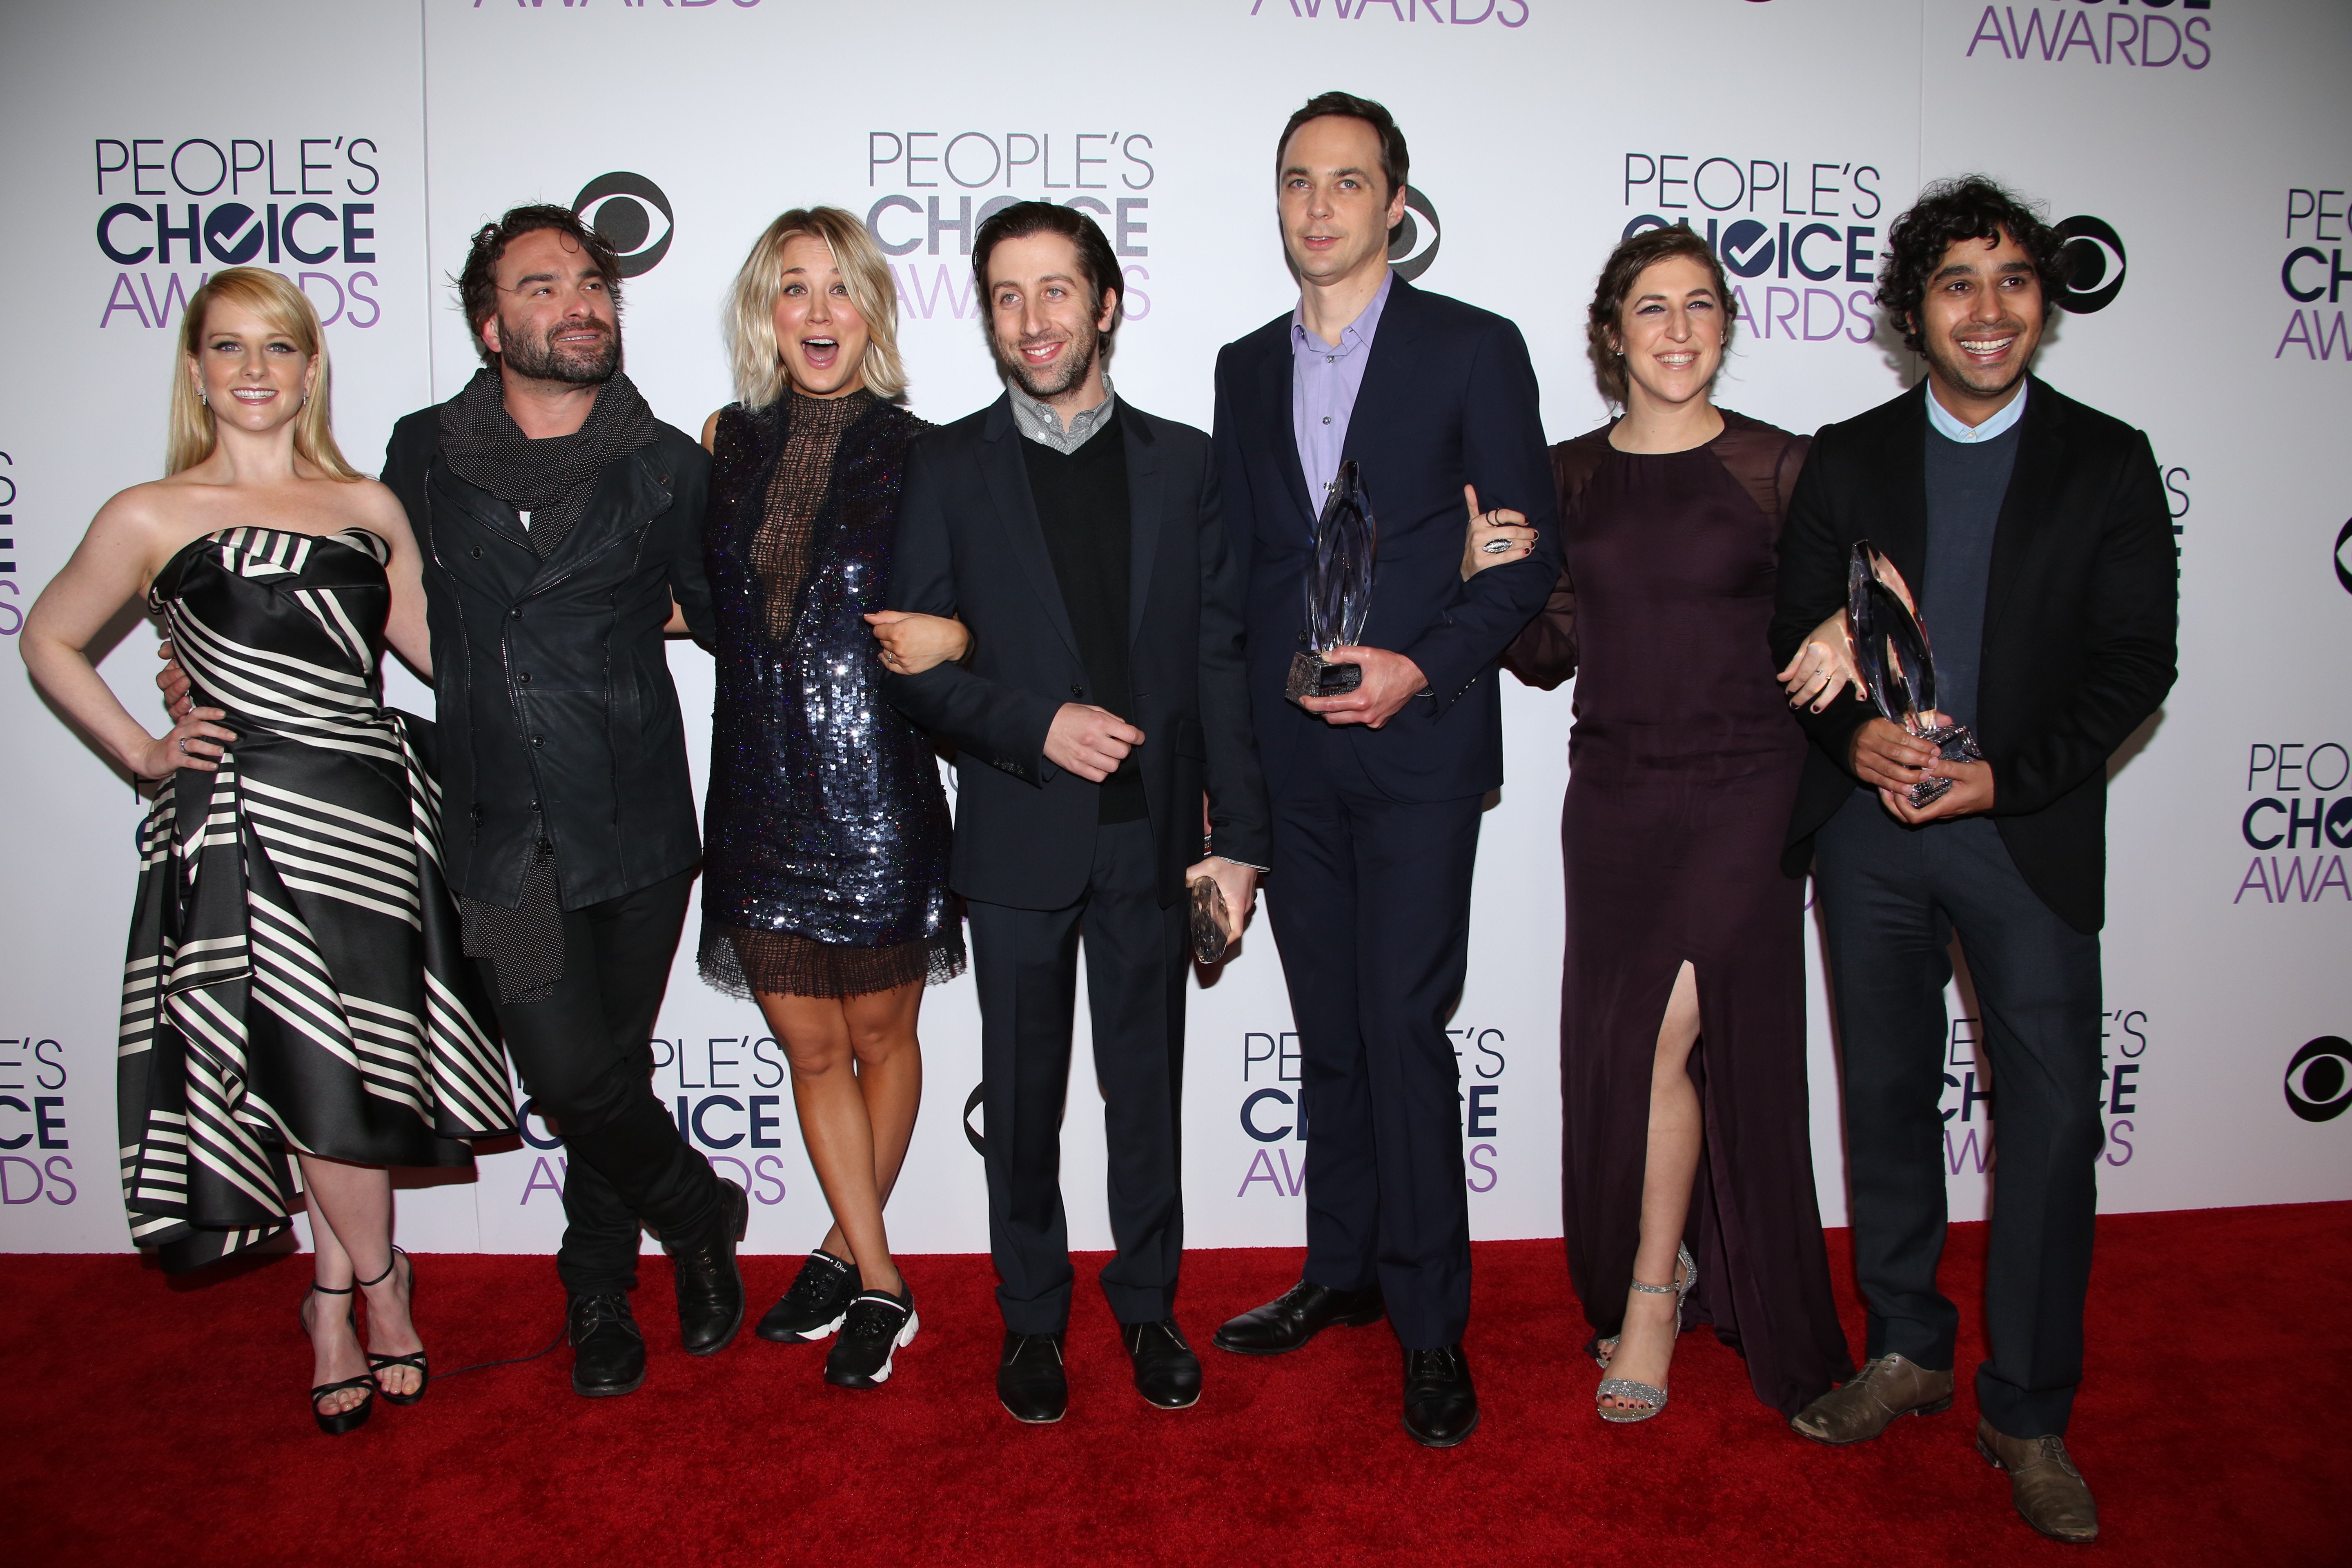 What does the cast of big bang theory look like in real life